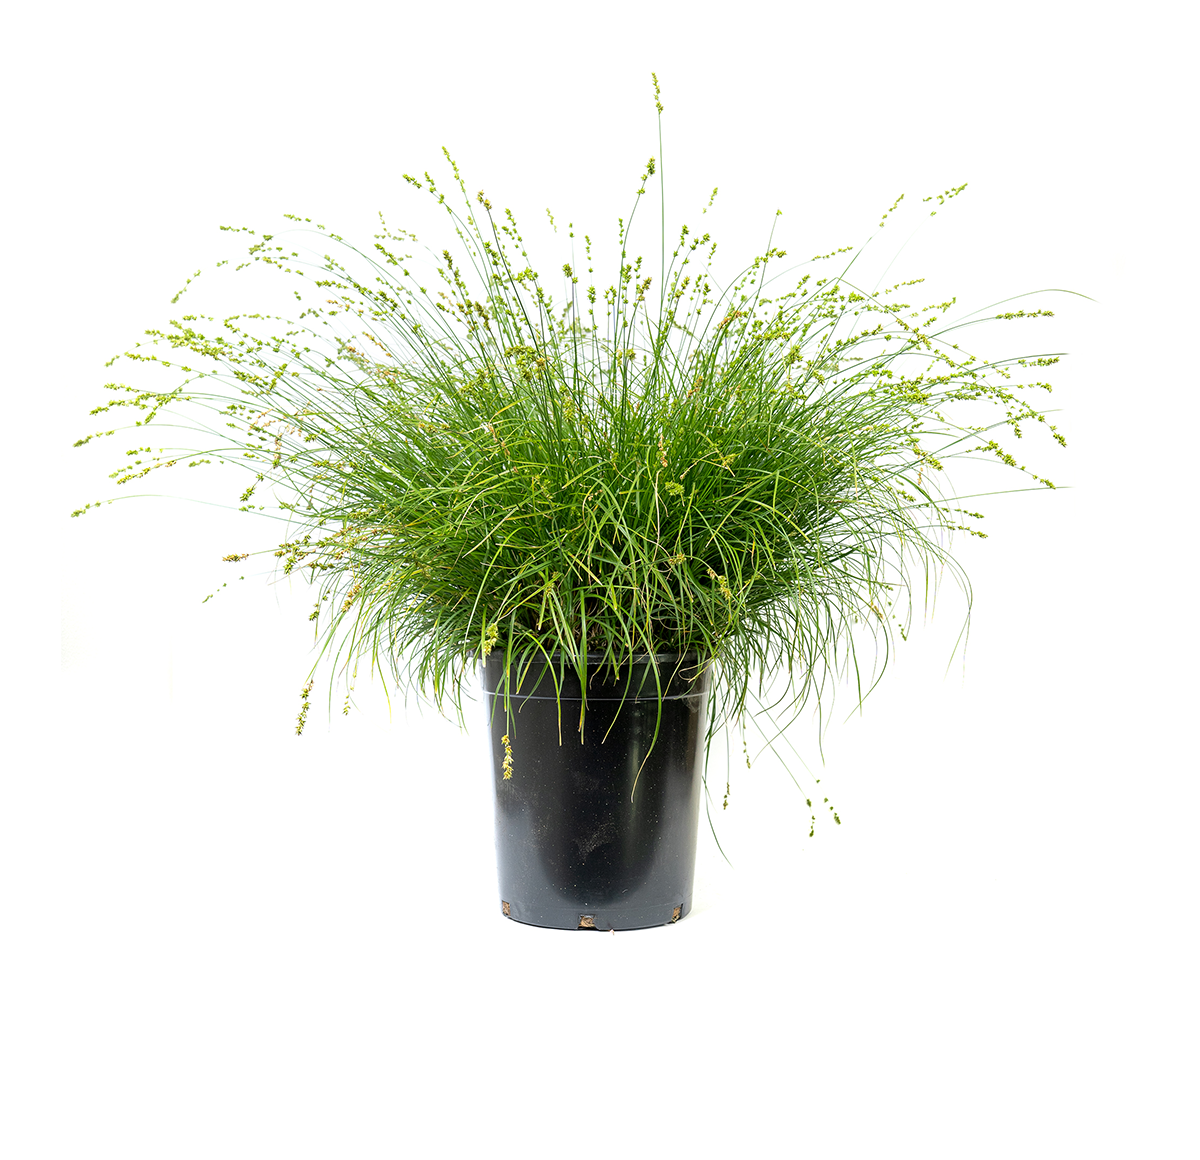 a single potted Berkeley sedge, a hardy perennial grass-like plant that is highly adaptable